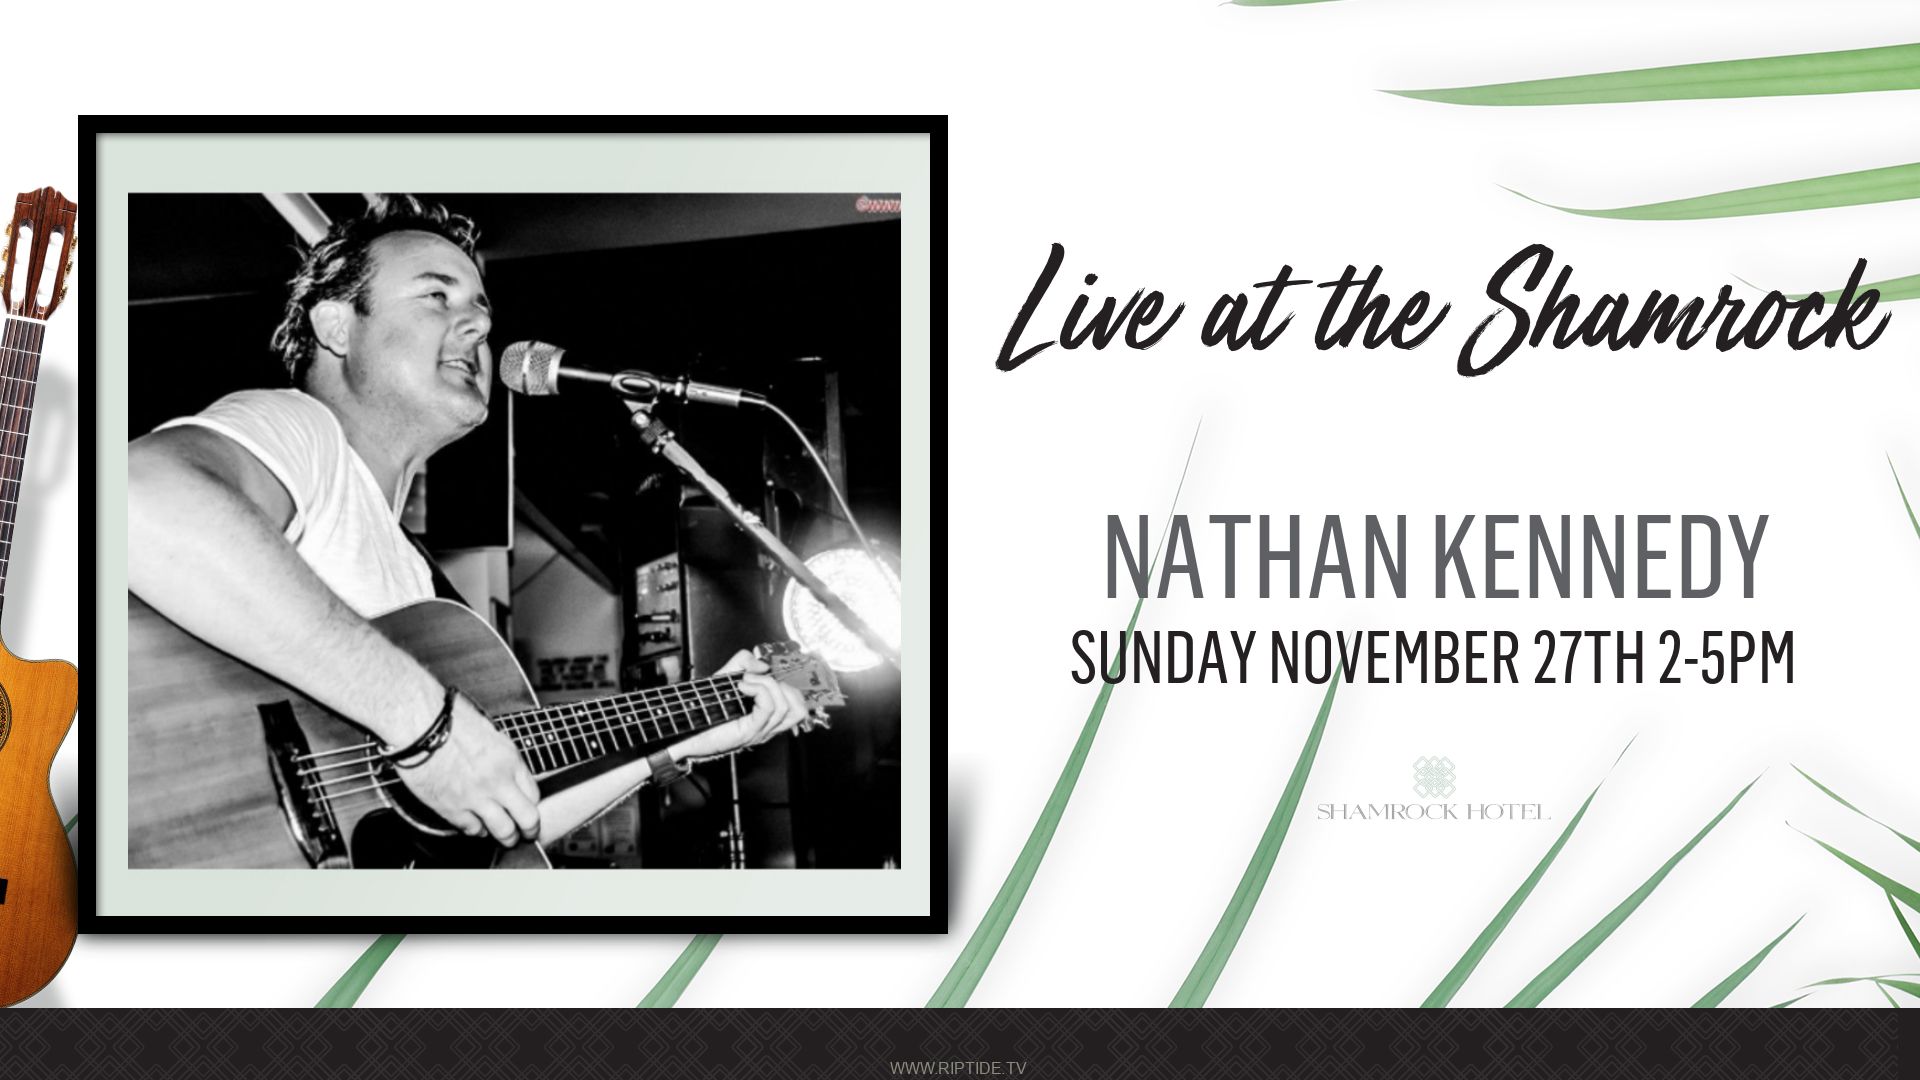 Event Poster for Nathan Kennedy (Live) @ Shamrock Hotel Mackay | EventsontheHorizon.com